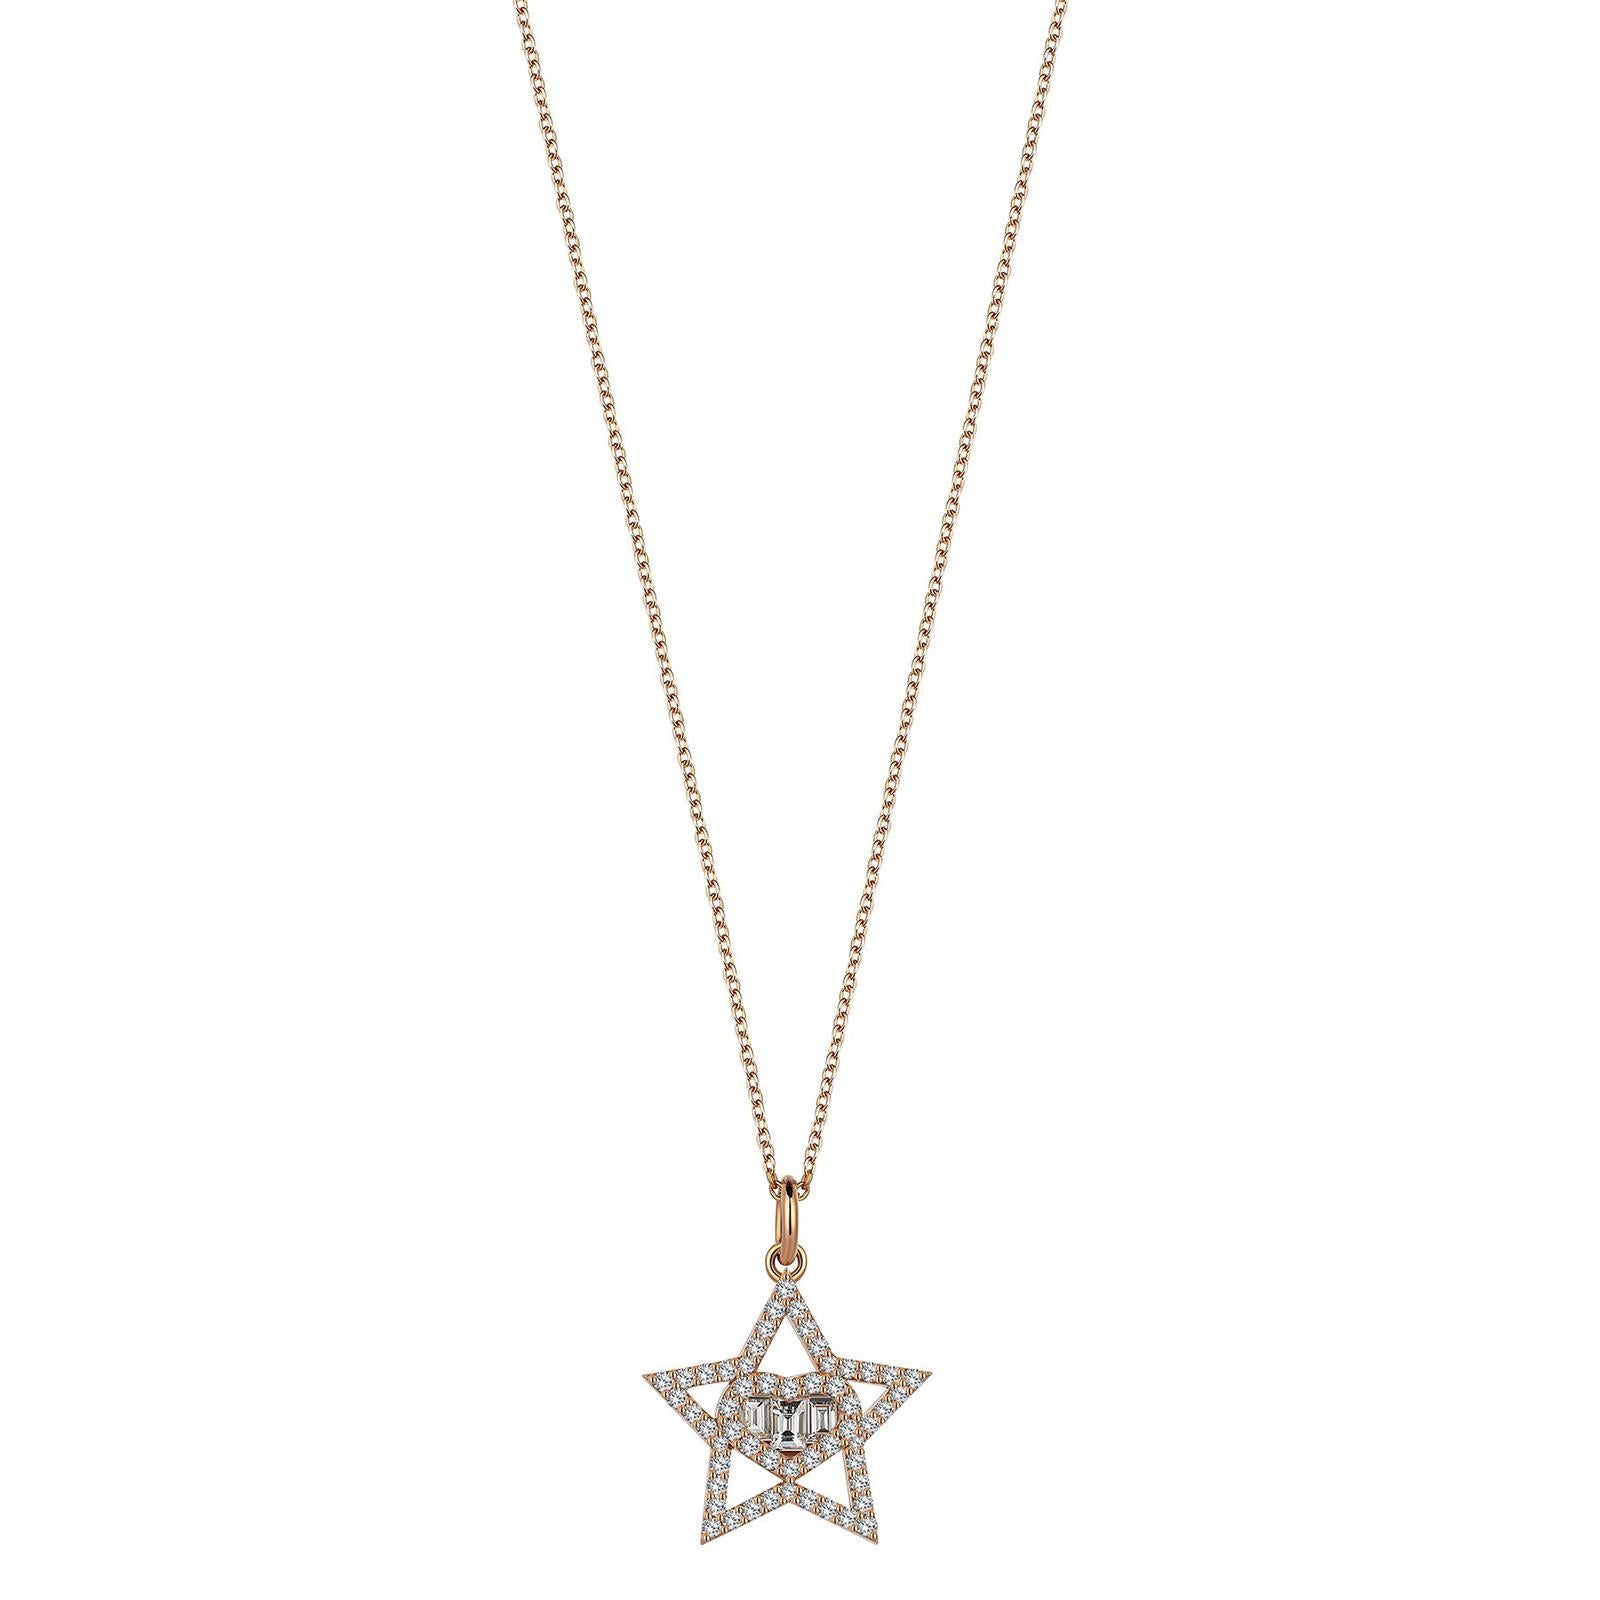 Sirius Charm Necklace Is Strung With Baguette Diamond-Encrusted Star Charms That Rest Along Its Lustrous 18-Karat Rose Gold Chain. Wear Yours To Add A Hint Of Sparkle To A Casual Daytime Look.

18K Rose Gold
Total Diamond Weight: 0.20 ct Baguette